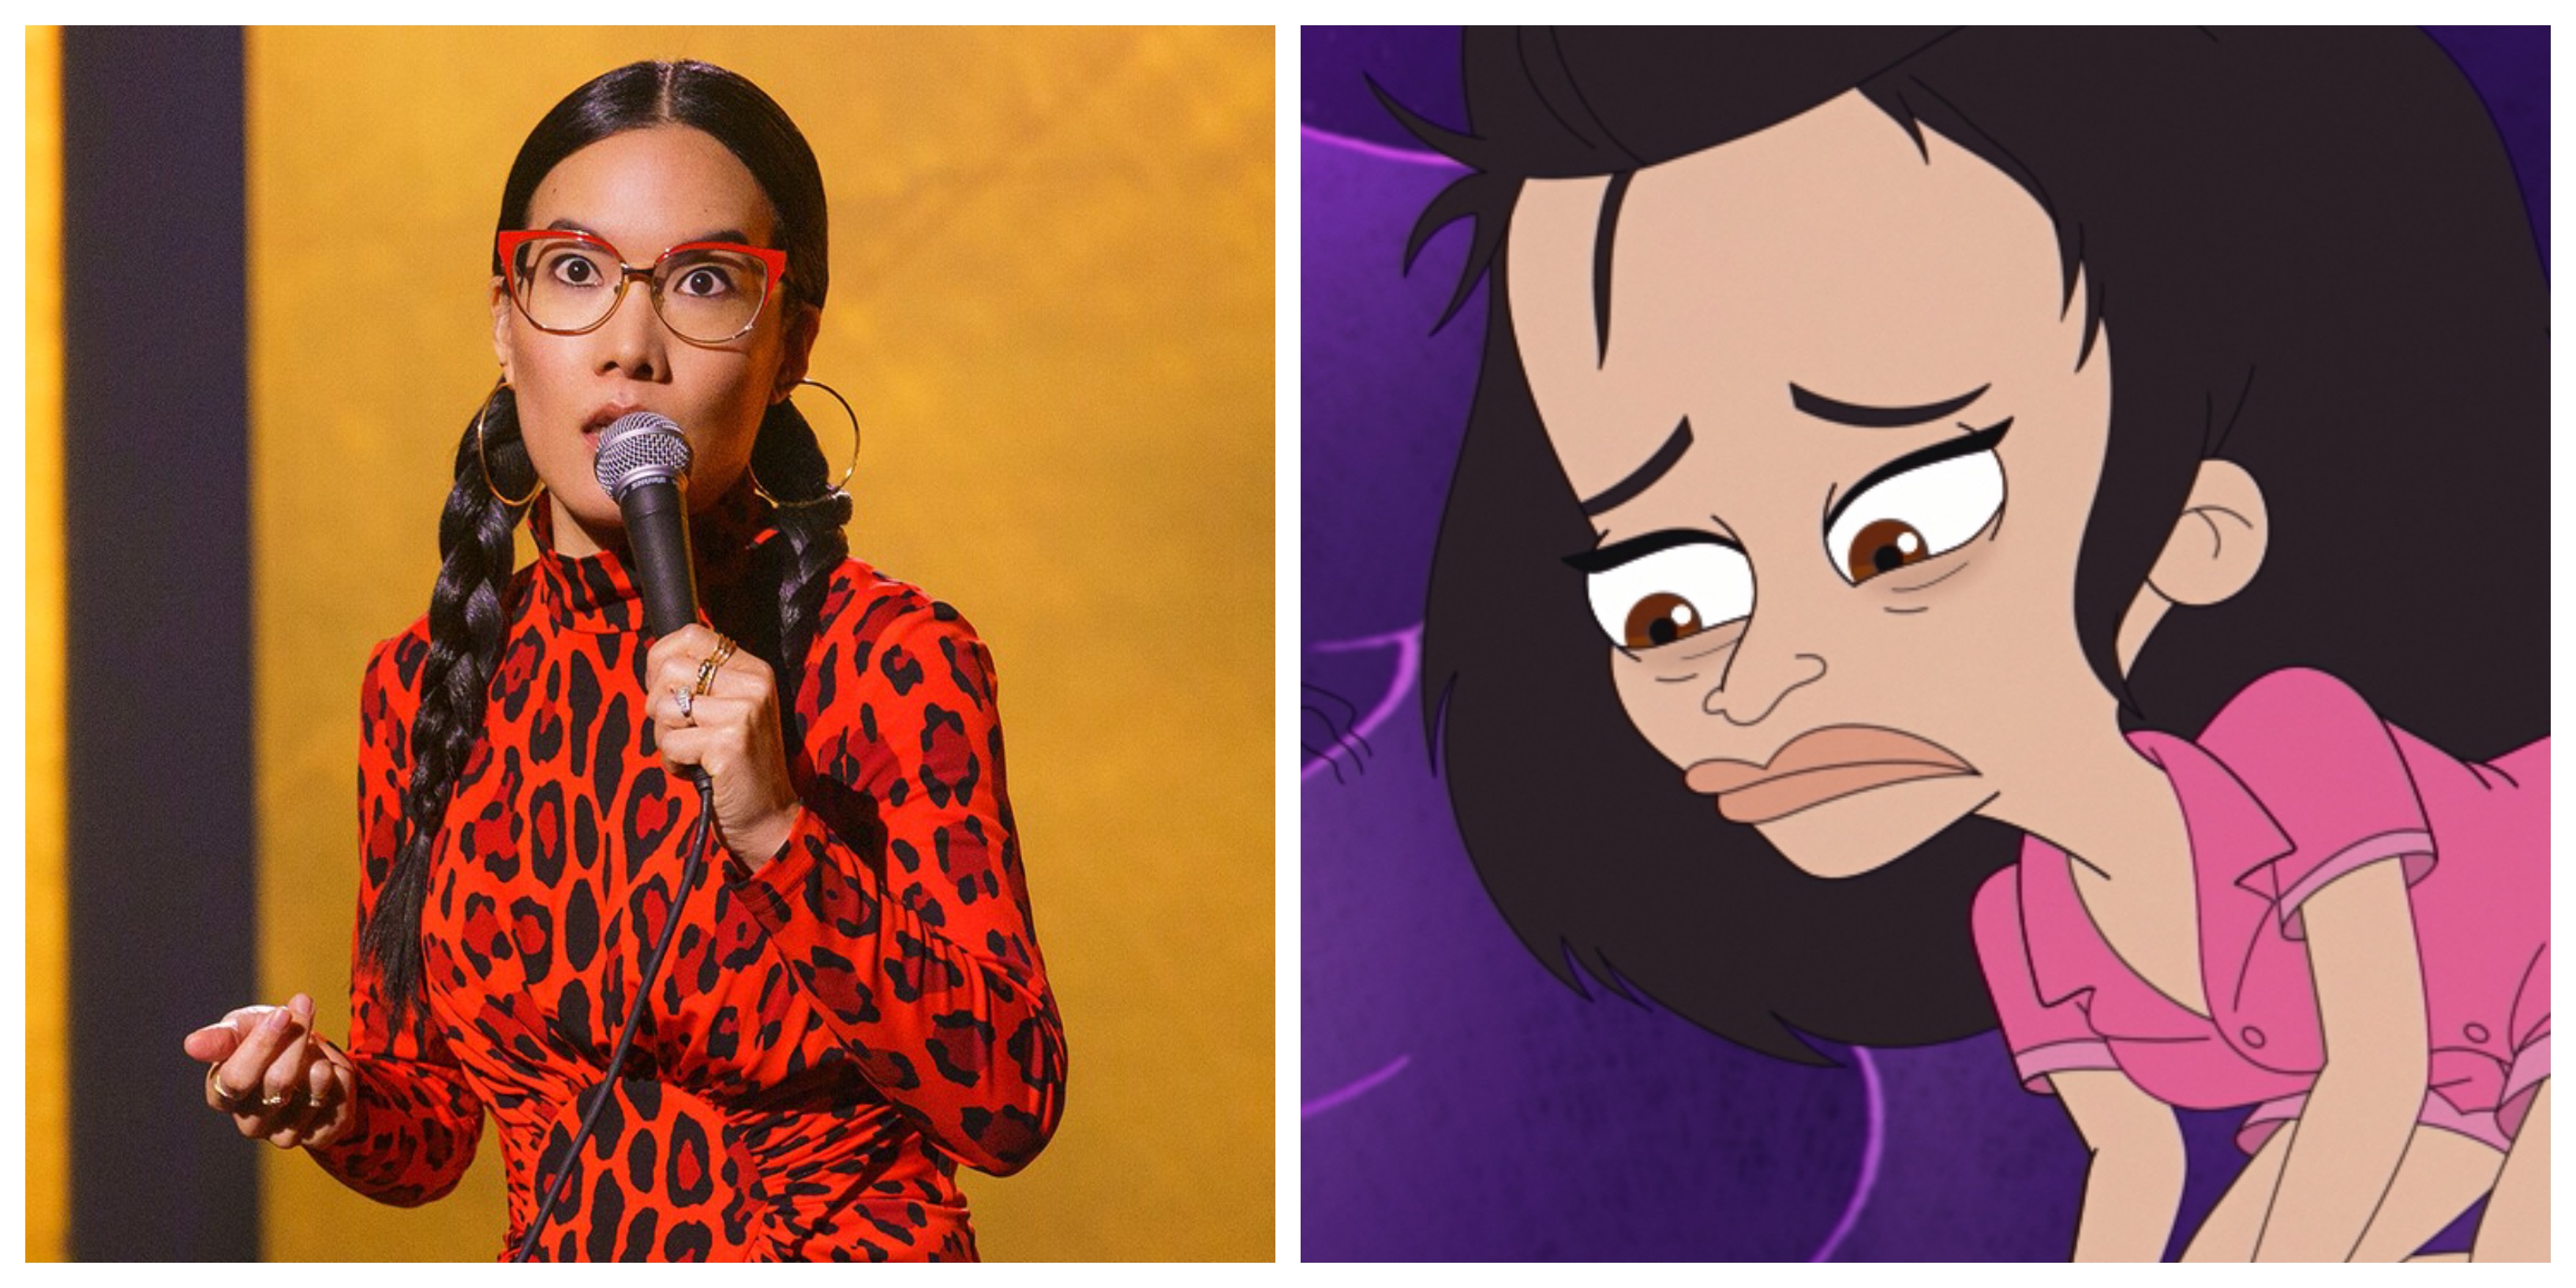 Human Resources Voice Cast - Ali Wong as Becca